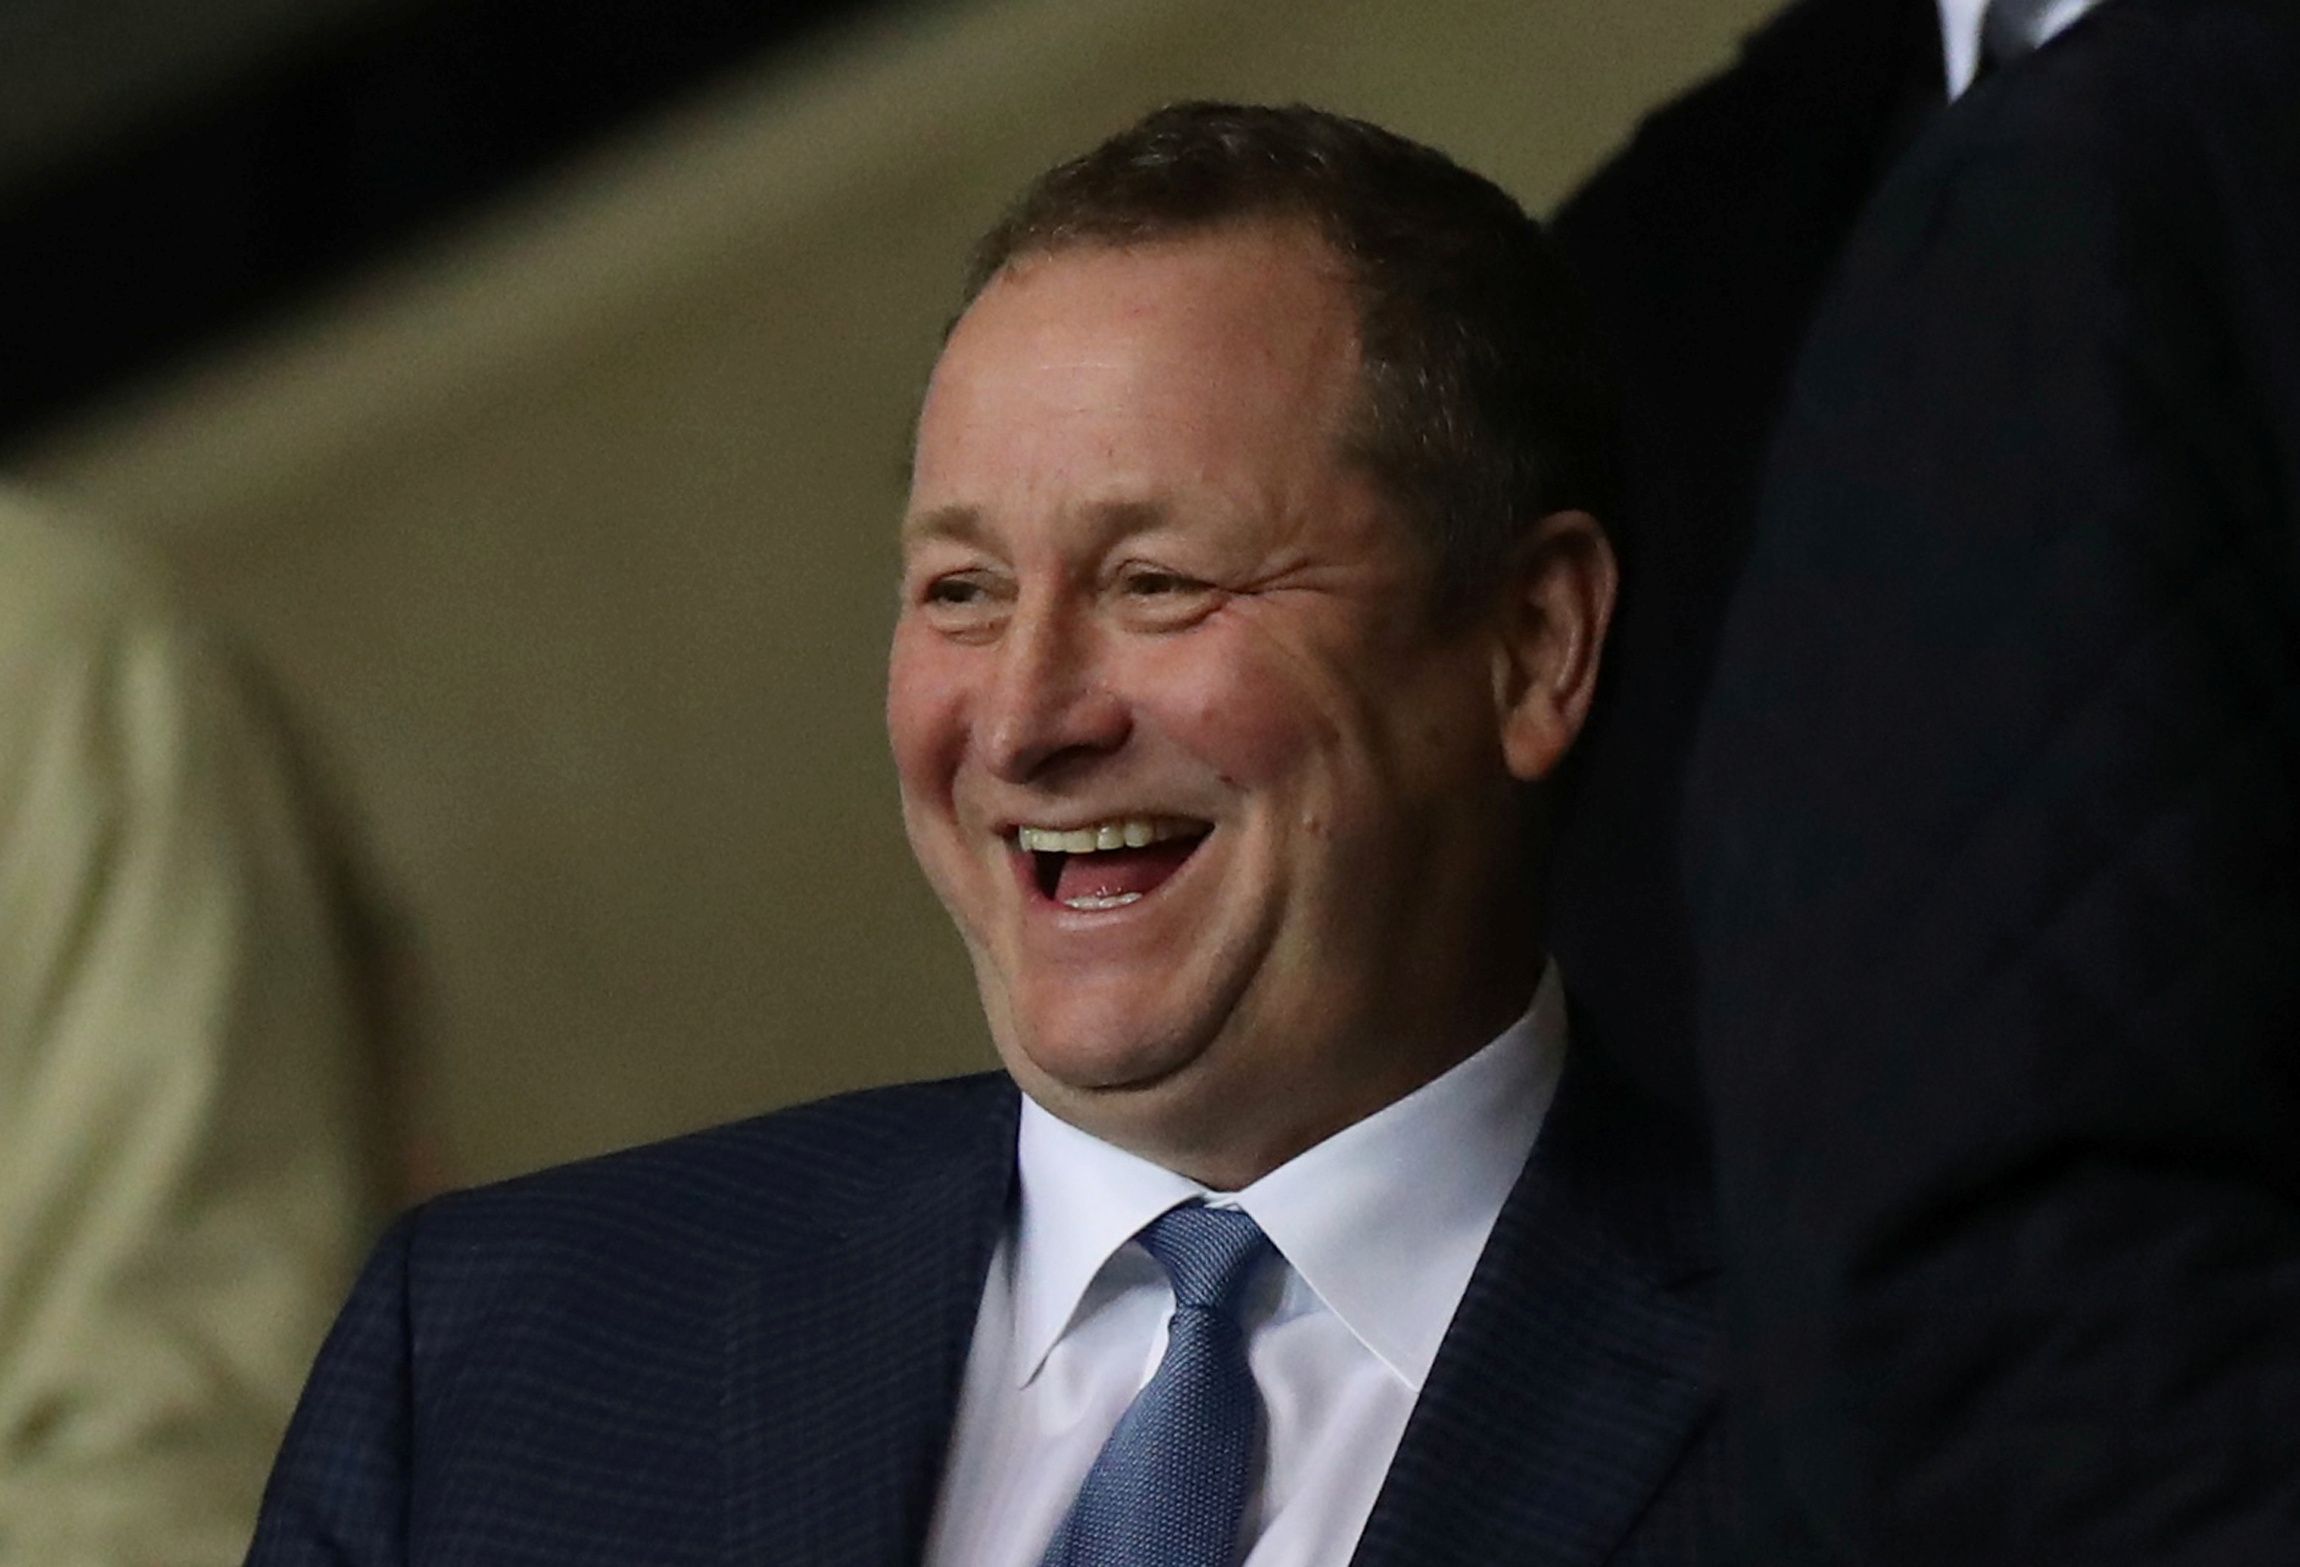 Soccer Football -  FA Cup Fourth Round Replay - Oxford United v Newcastle United  - Kassam Stadium, Oxford, Britain - February 4, 2020  Newcastle United owner Mike Ashley before the match     REUTERS/David Klein